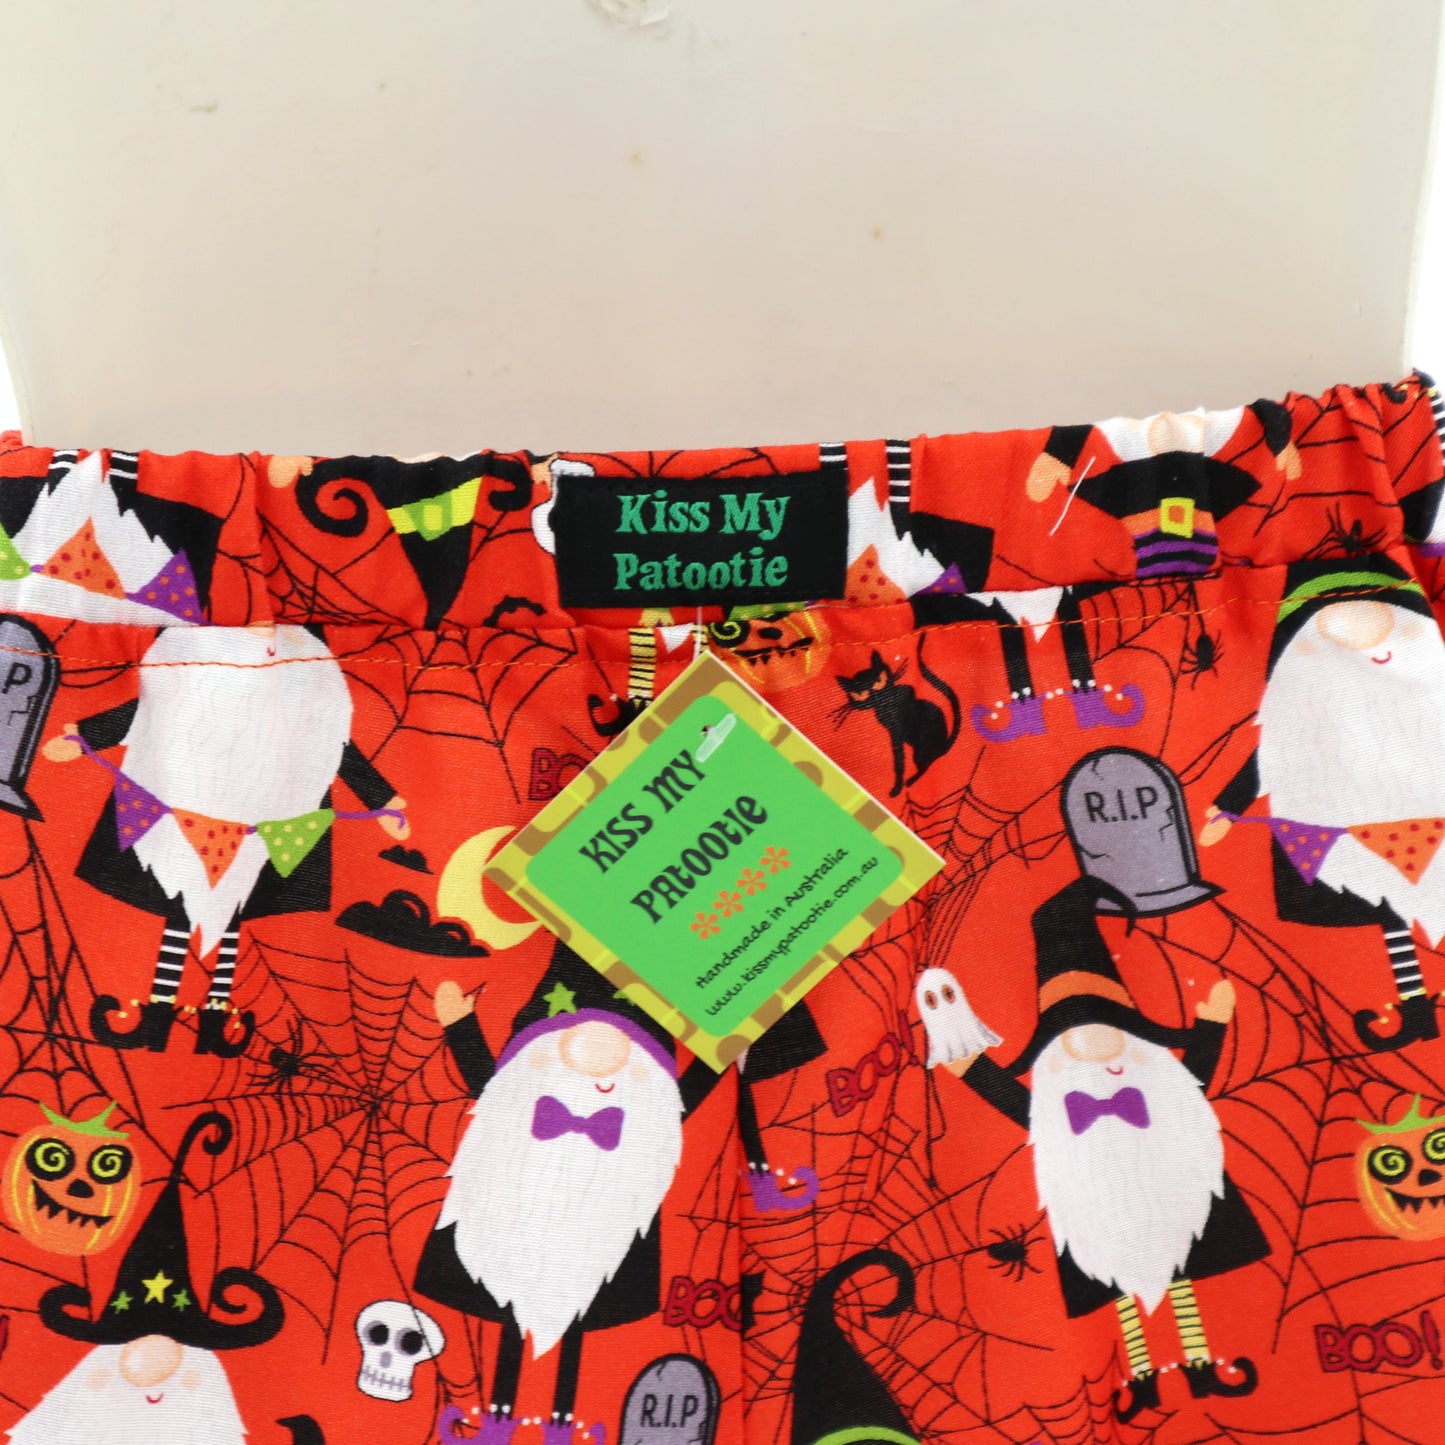 Kids shorts with pockets - sizes 000 to 6 - halloween elves